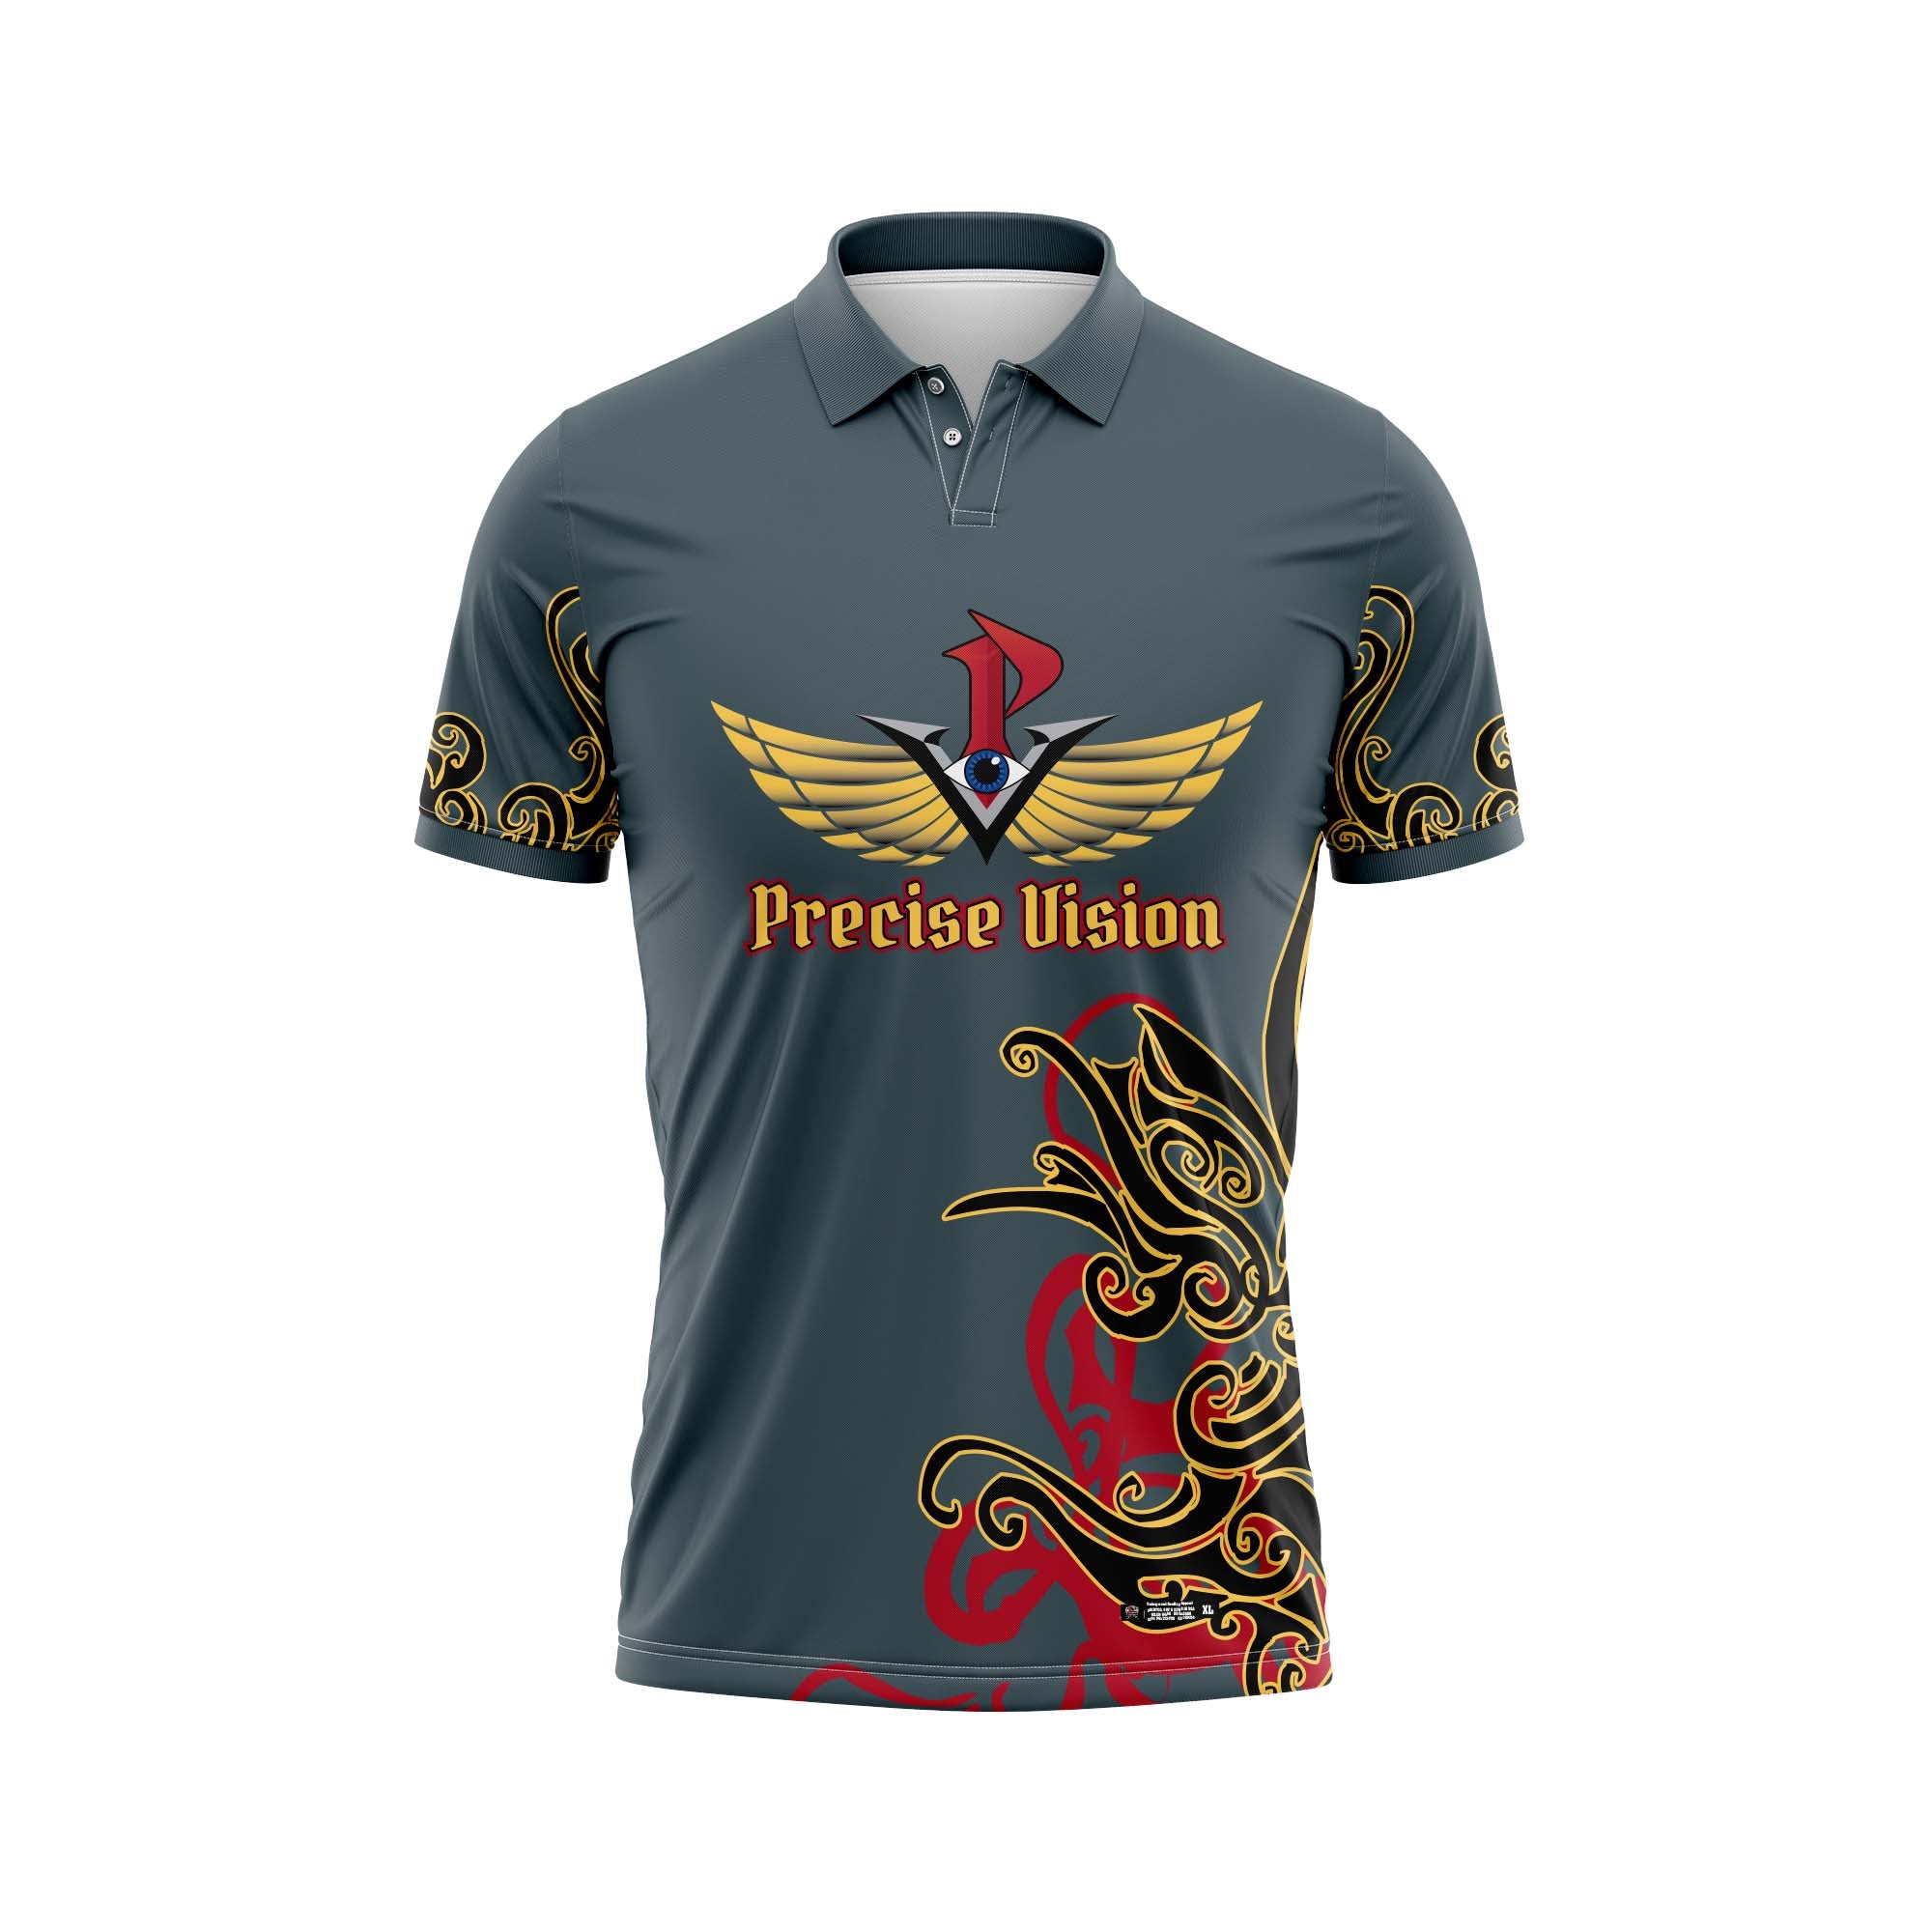 Precise Vision Grey Jersey